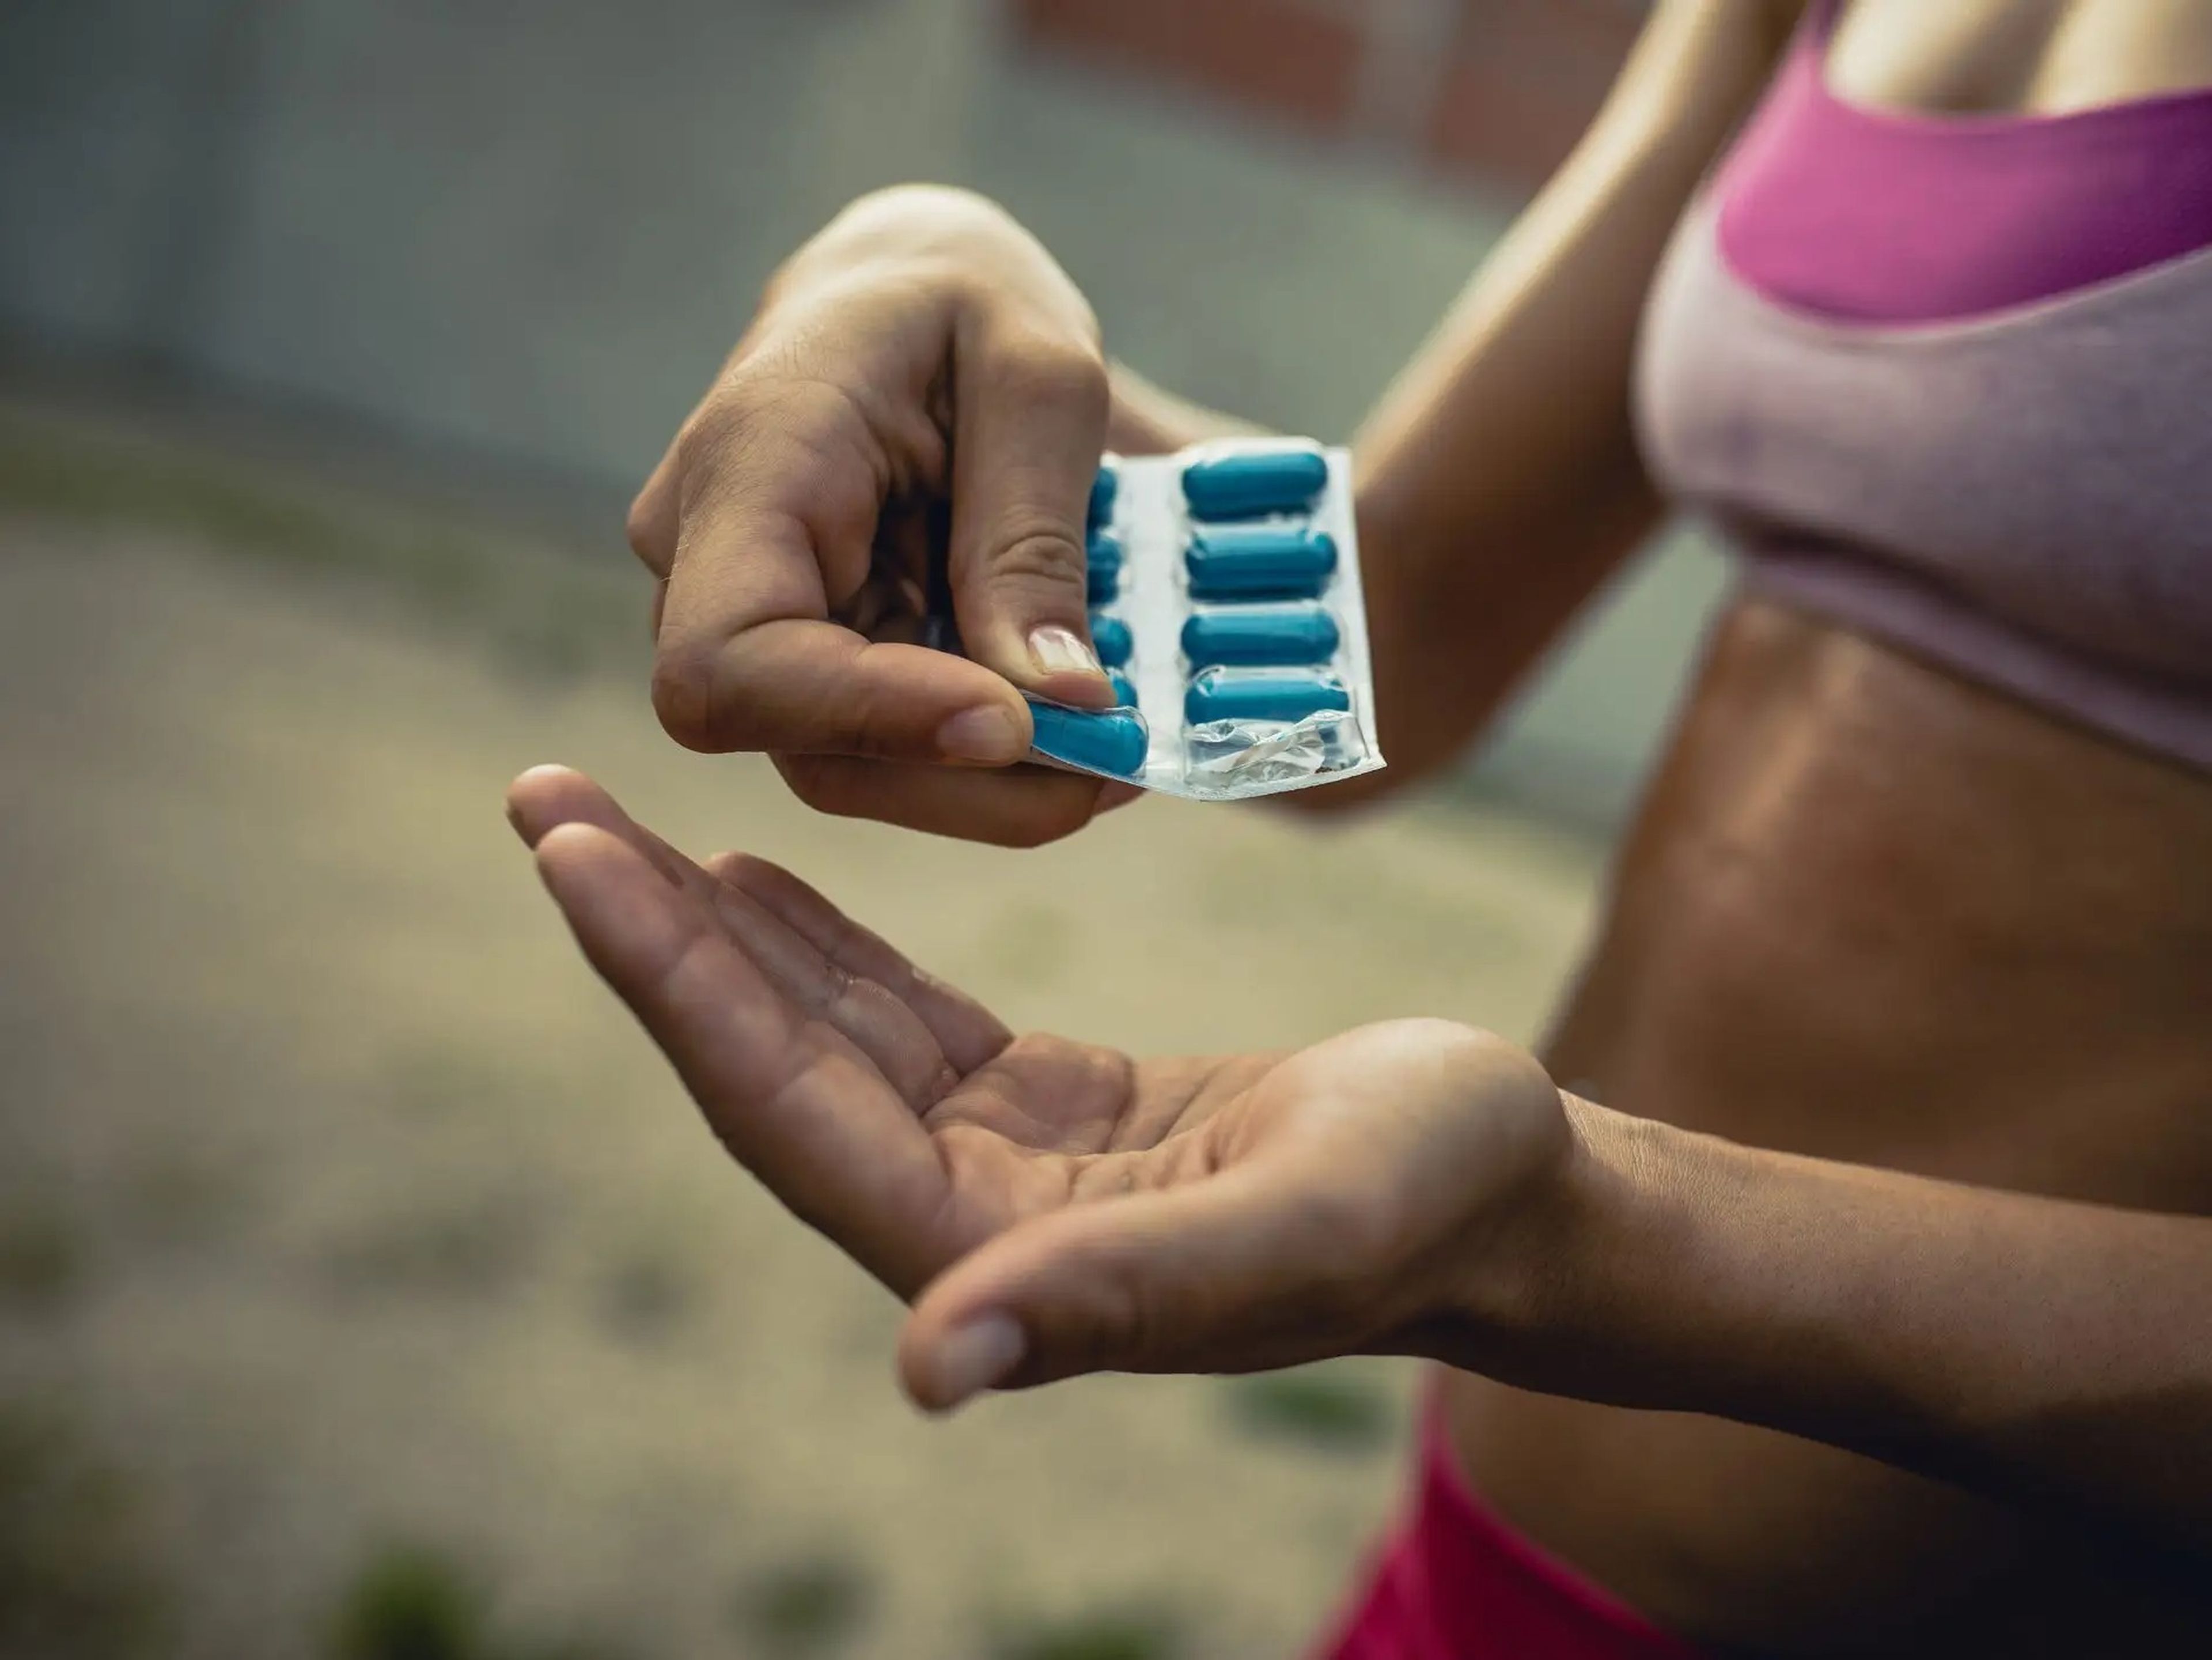 close-up image of a person in a sports bra taking supplement pills